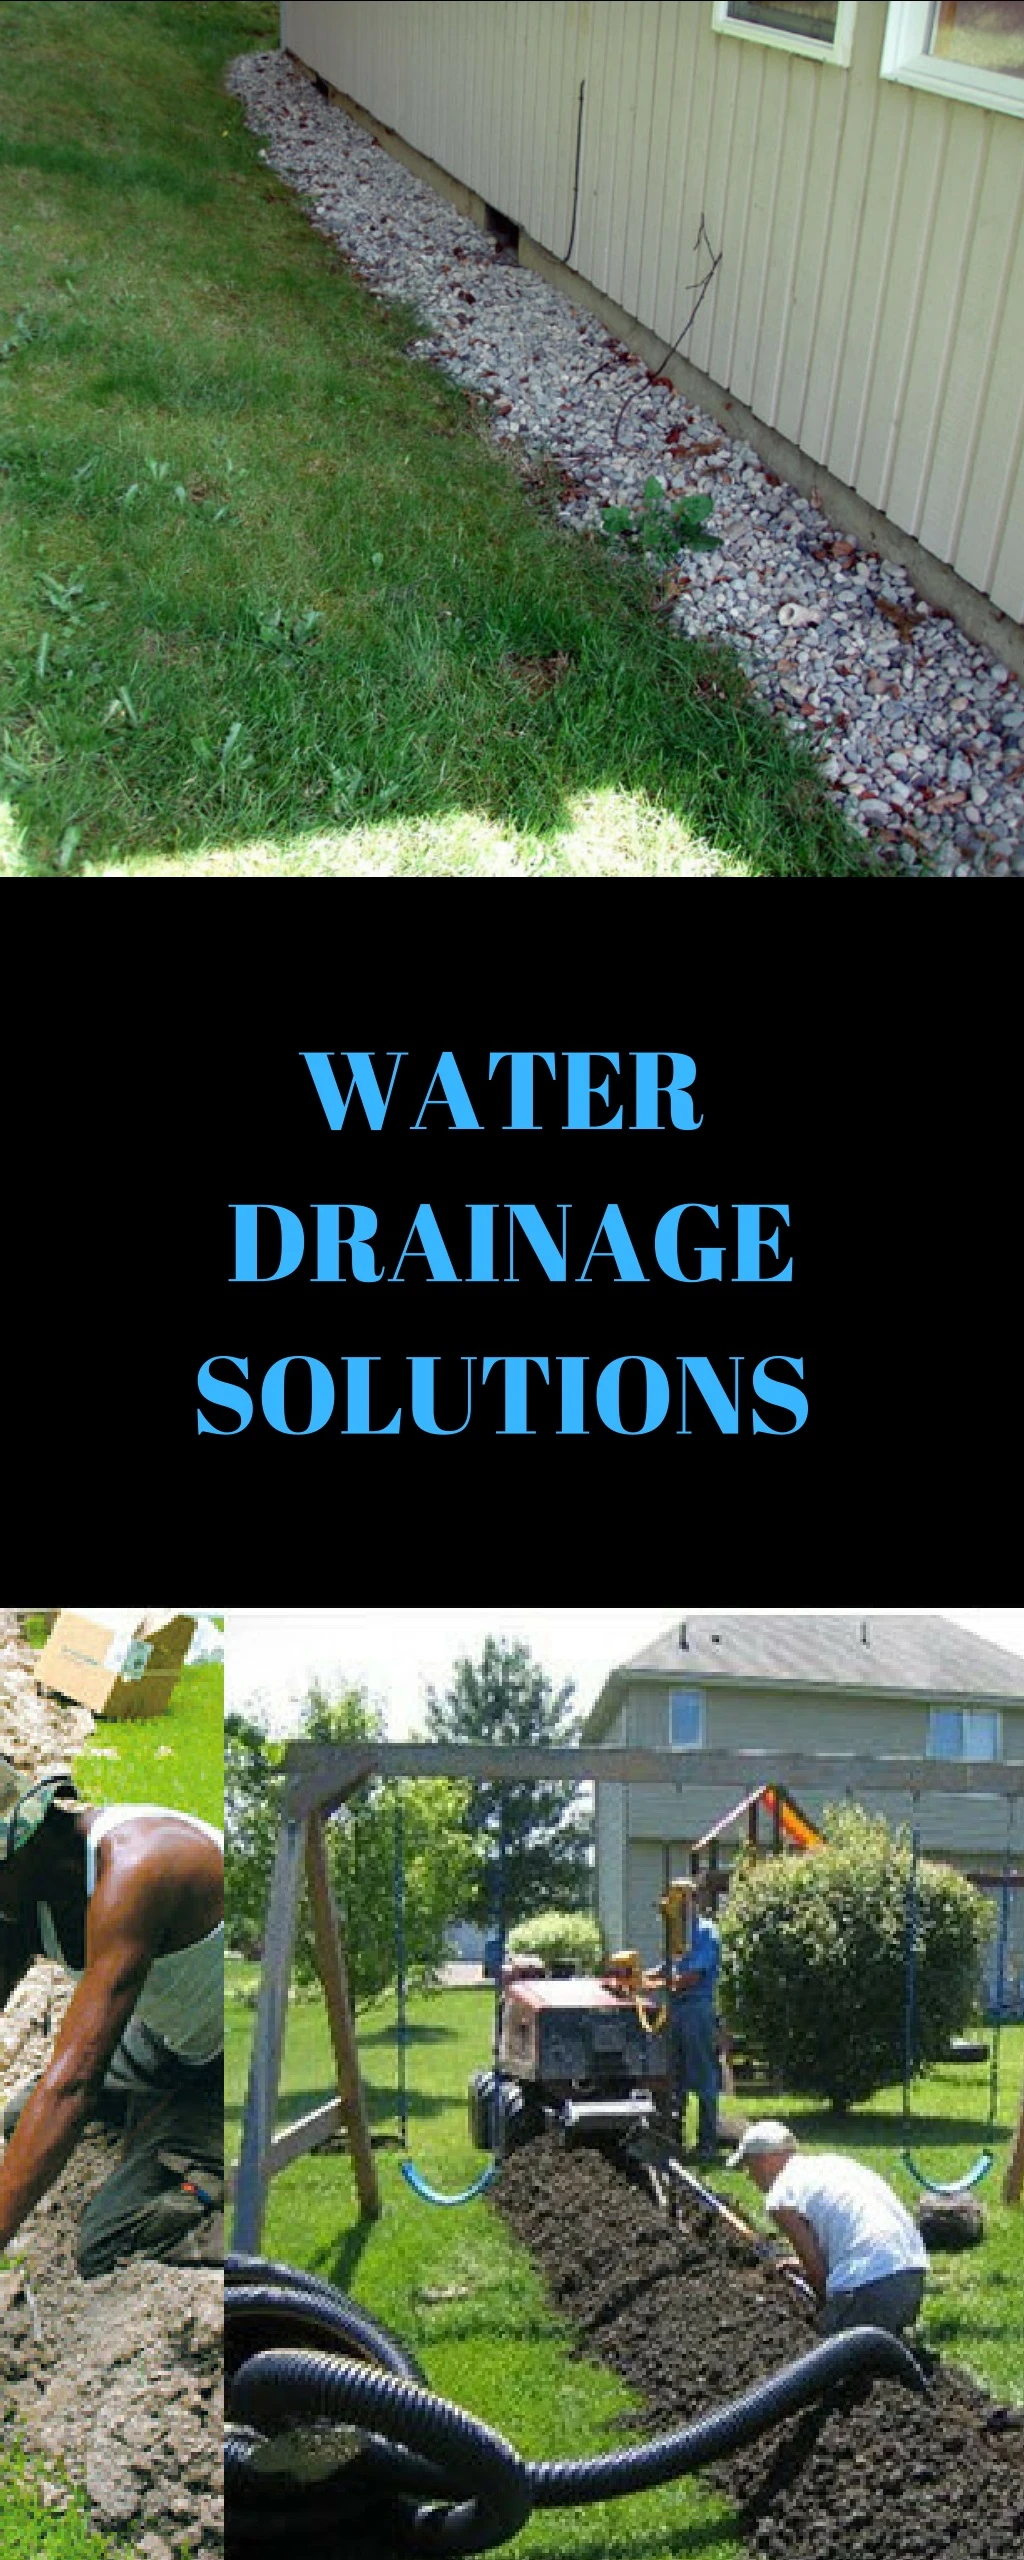 water drainage solutions